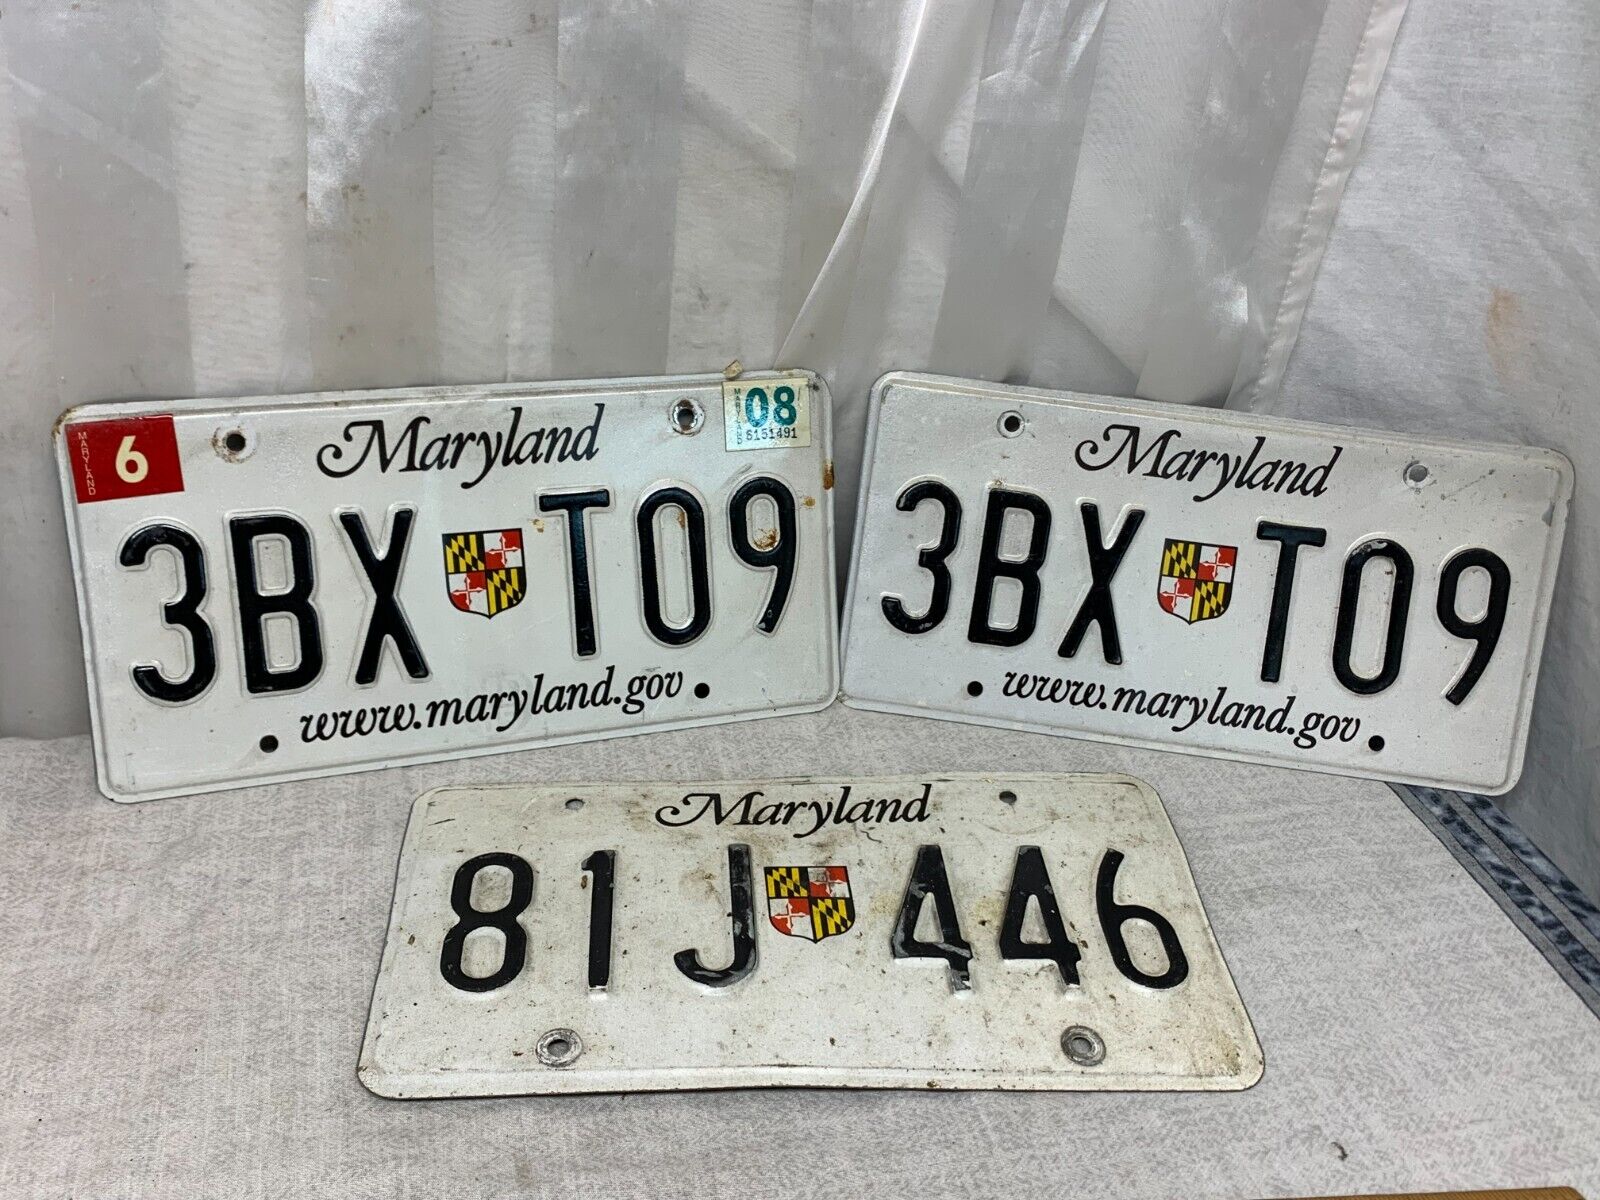 2008 Three Piece Vintage Maryland USA License Plate #3BX T09 Collectible